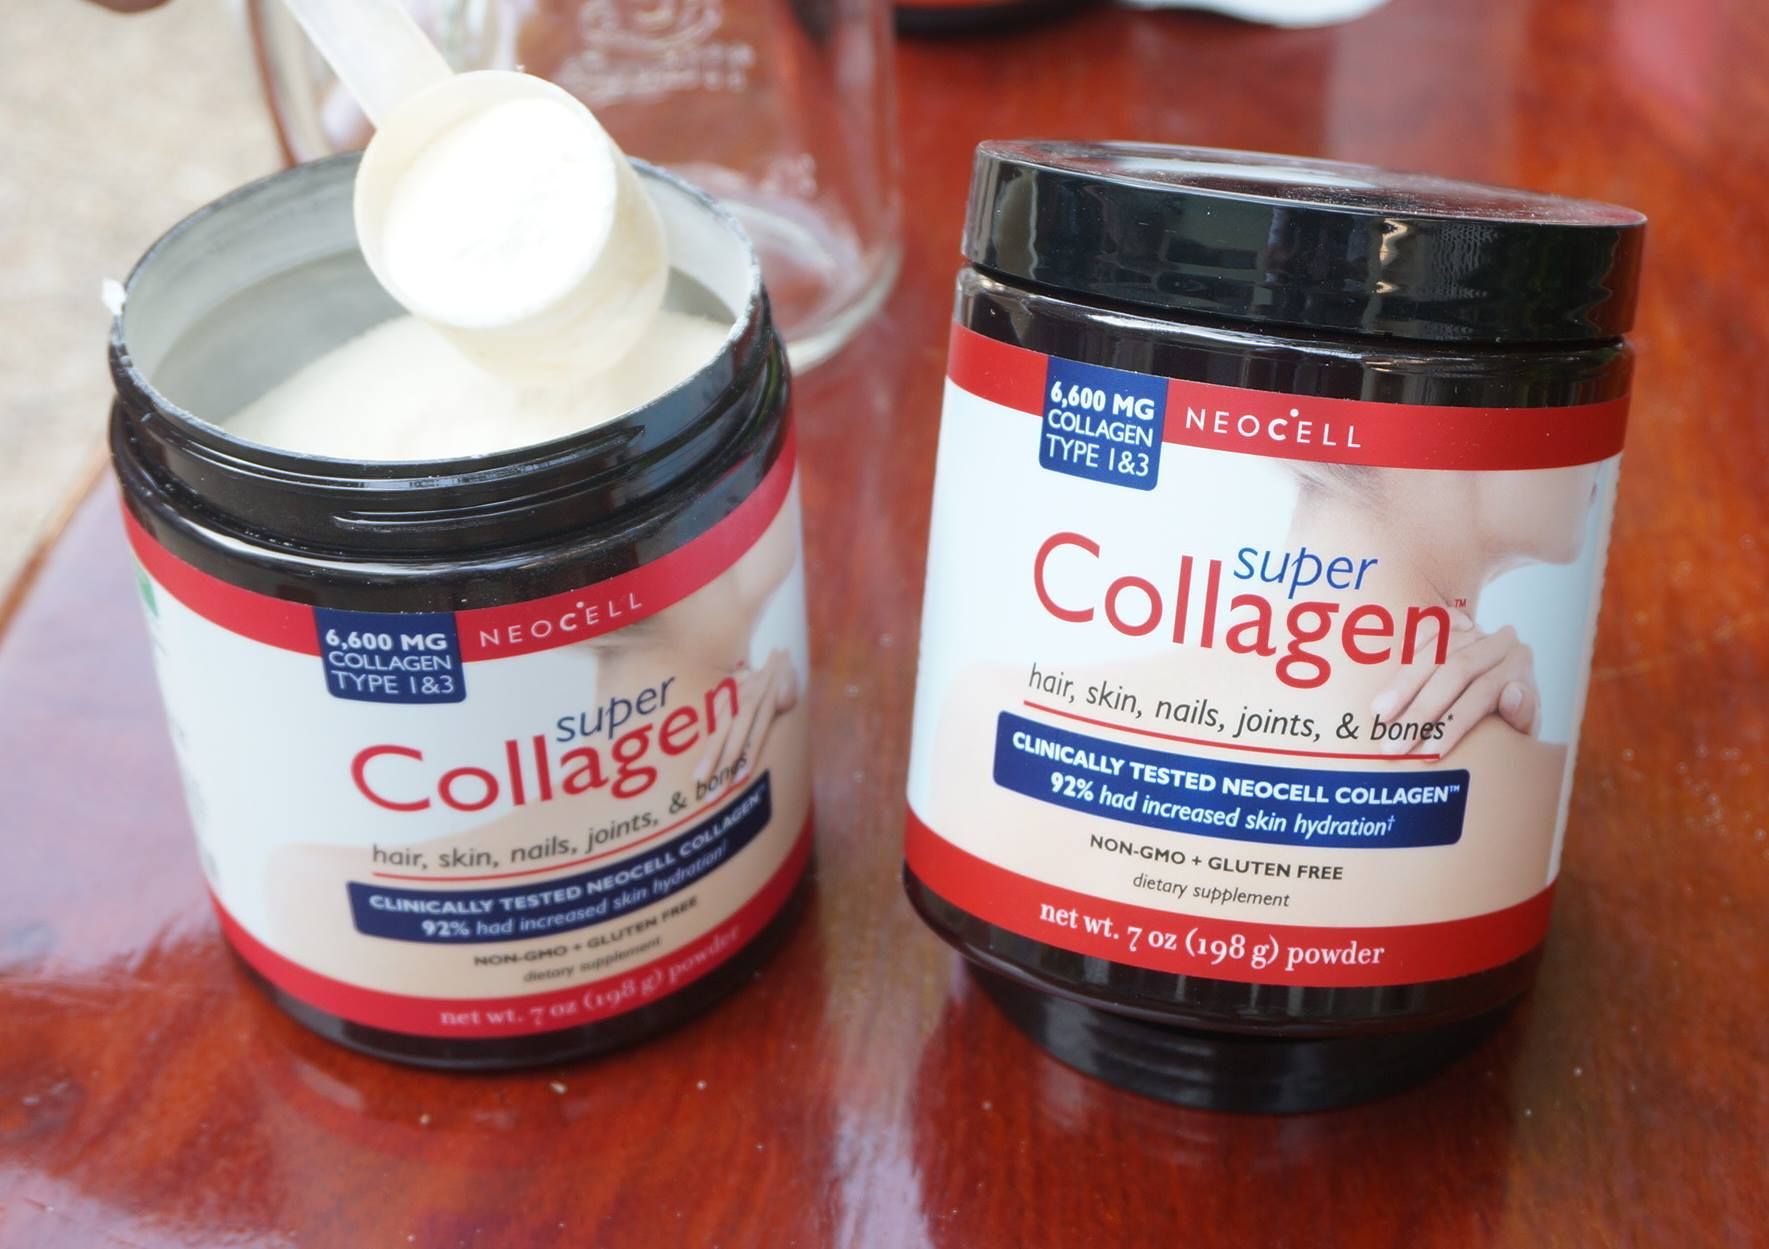 How To Spot Fake Neocell Collagen Powder